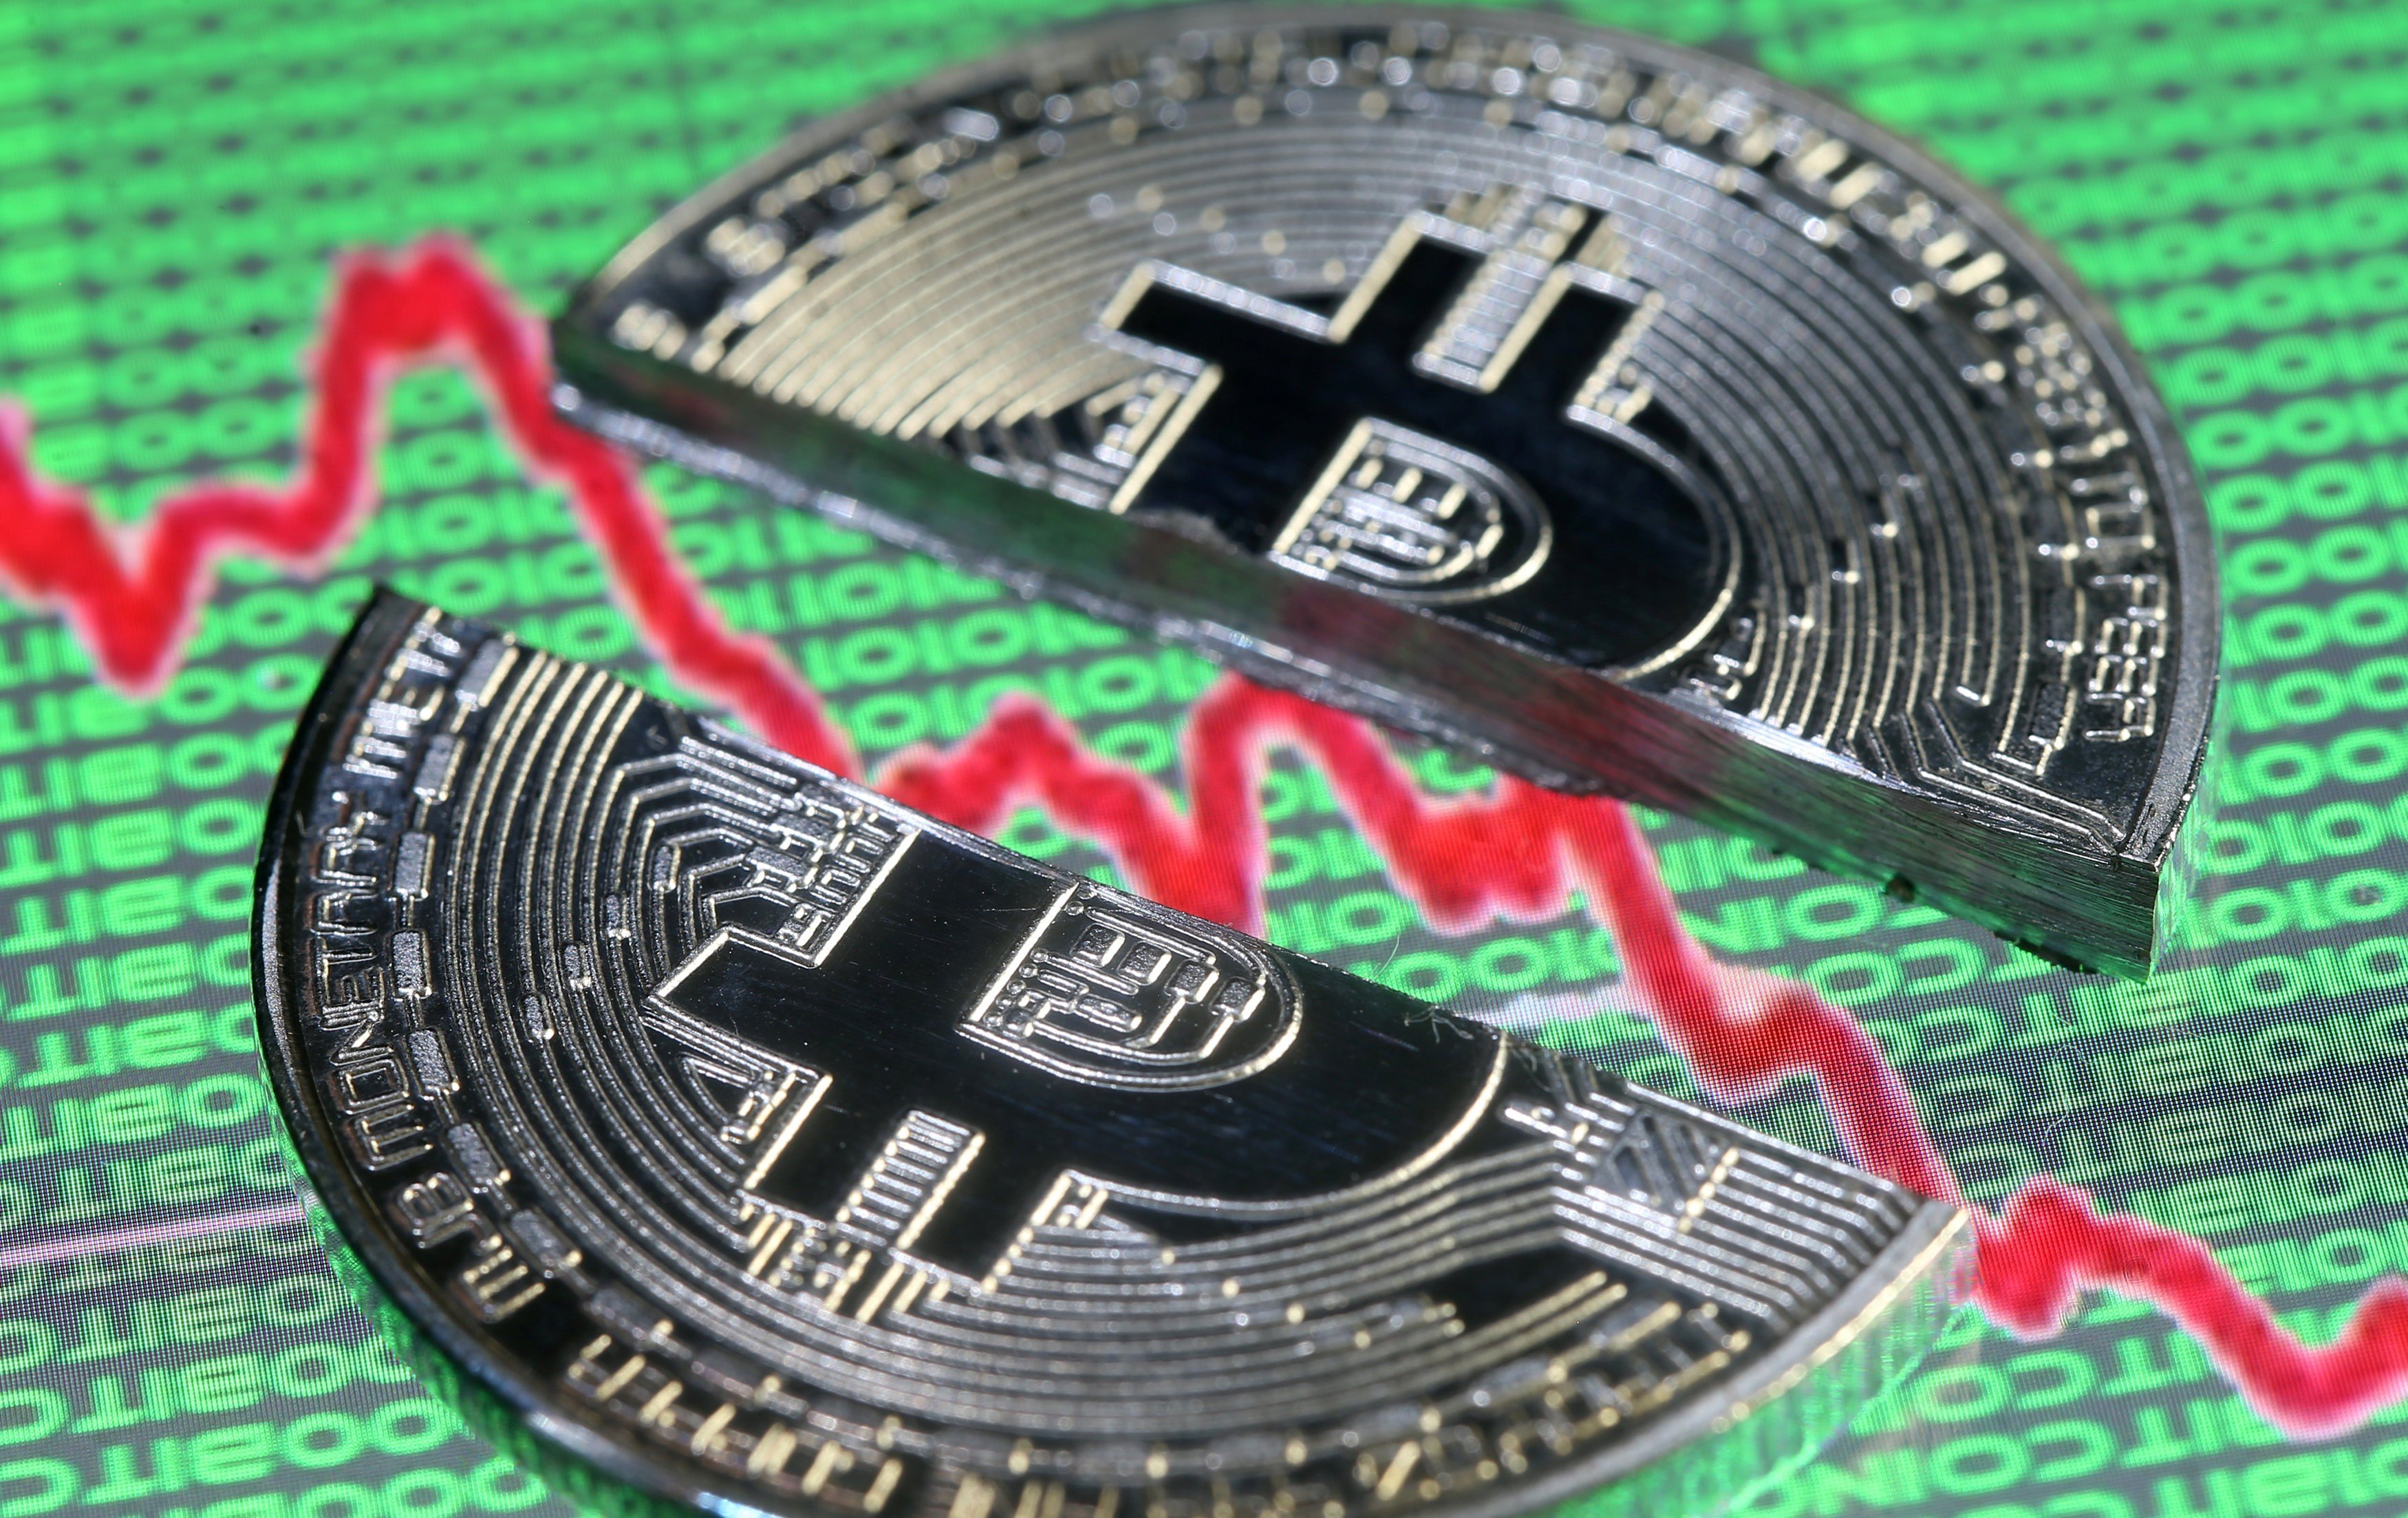 Strong correlation between online searches for the digital currency and its fluctuations show investors’ ‘fear of missing out’ is driving volatility, say analysts